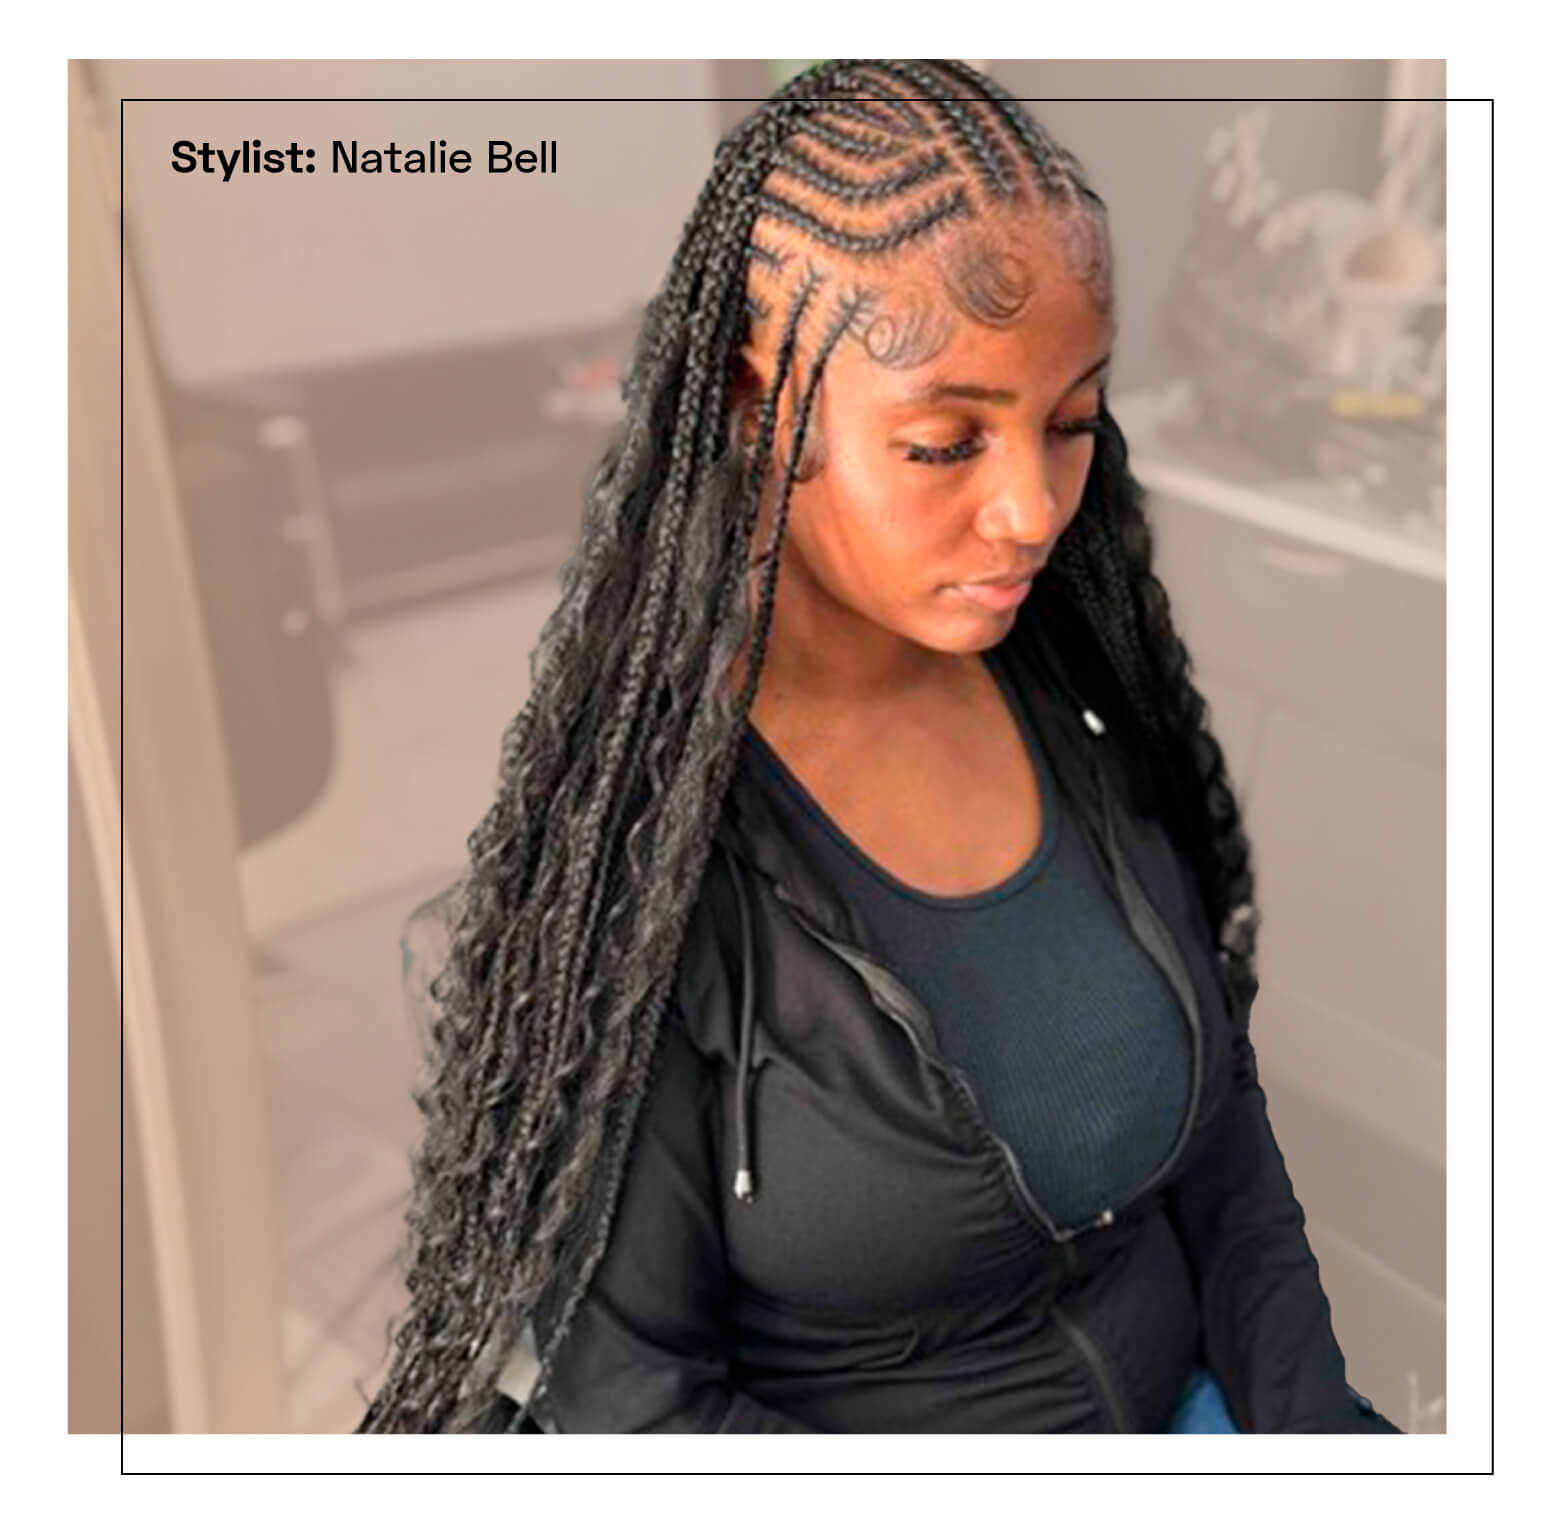 43 Stunning Fulani Braids Hairstyles for Your Next Look